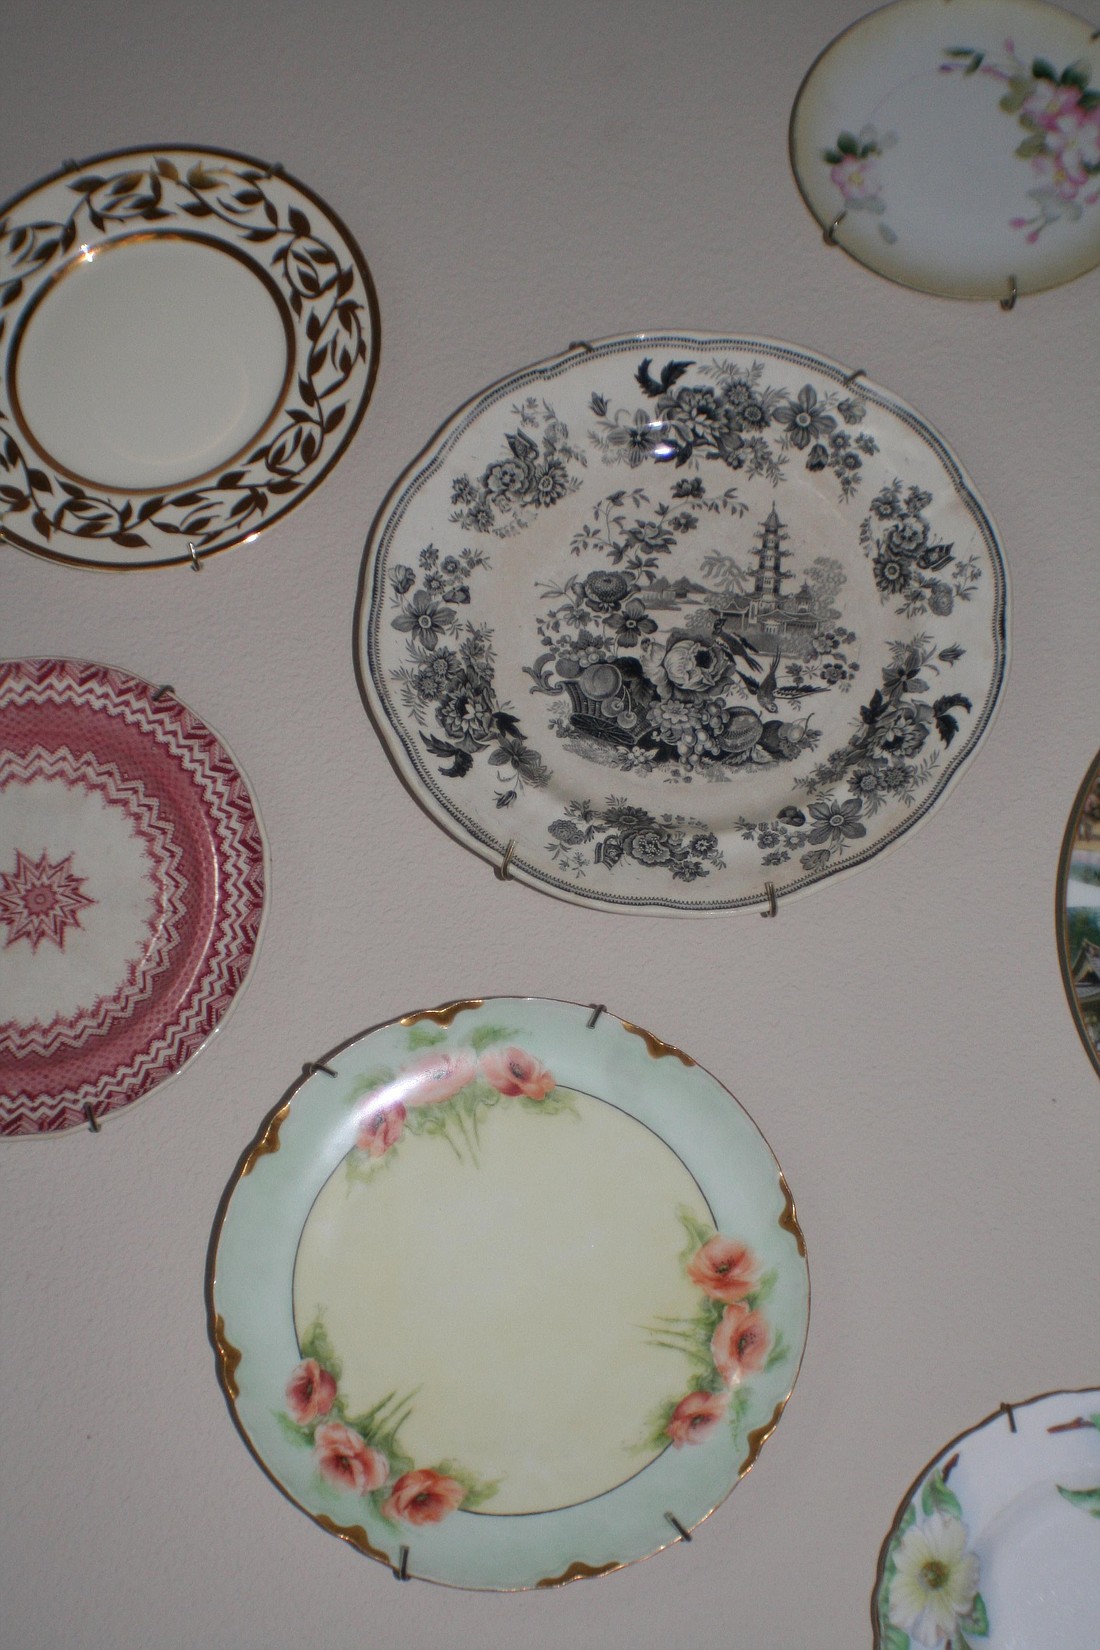 Do these lovely heirlooms make my house look like a museum?